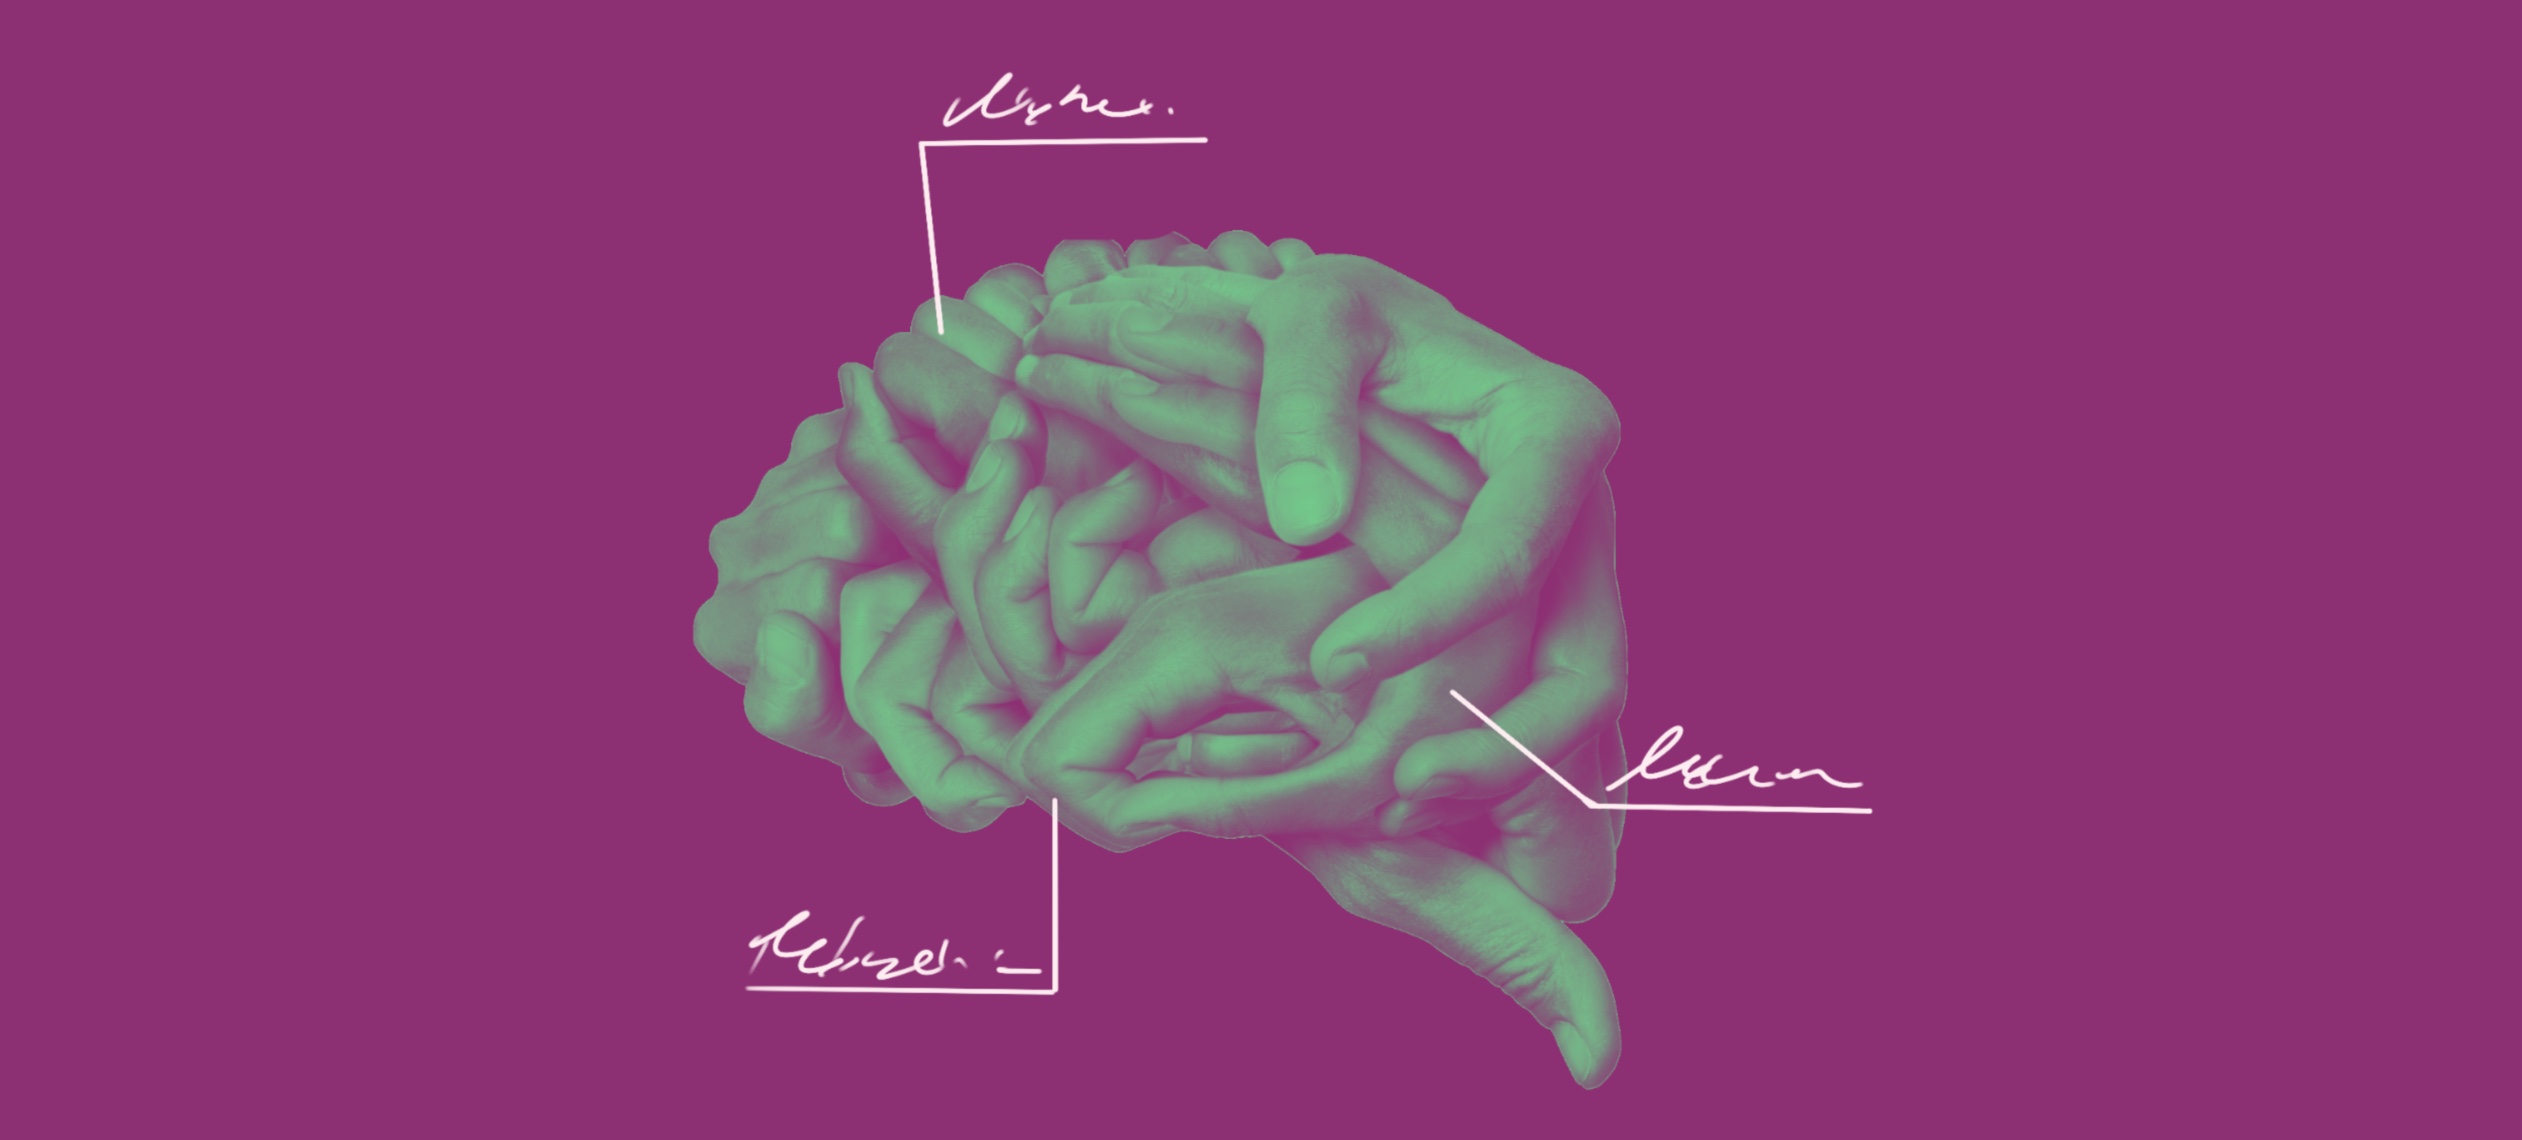 Intertwined hands with a green filter form the shape of a labeled brain on a purple background.